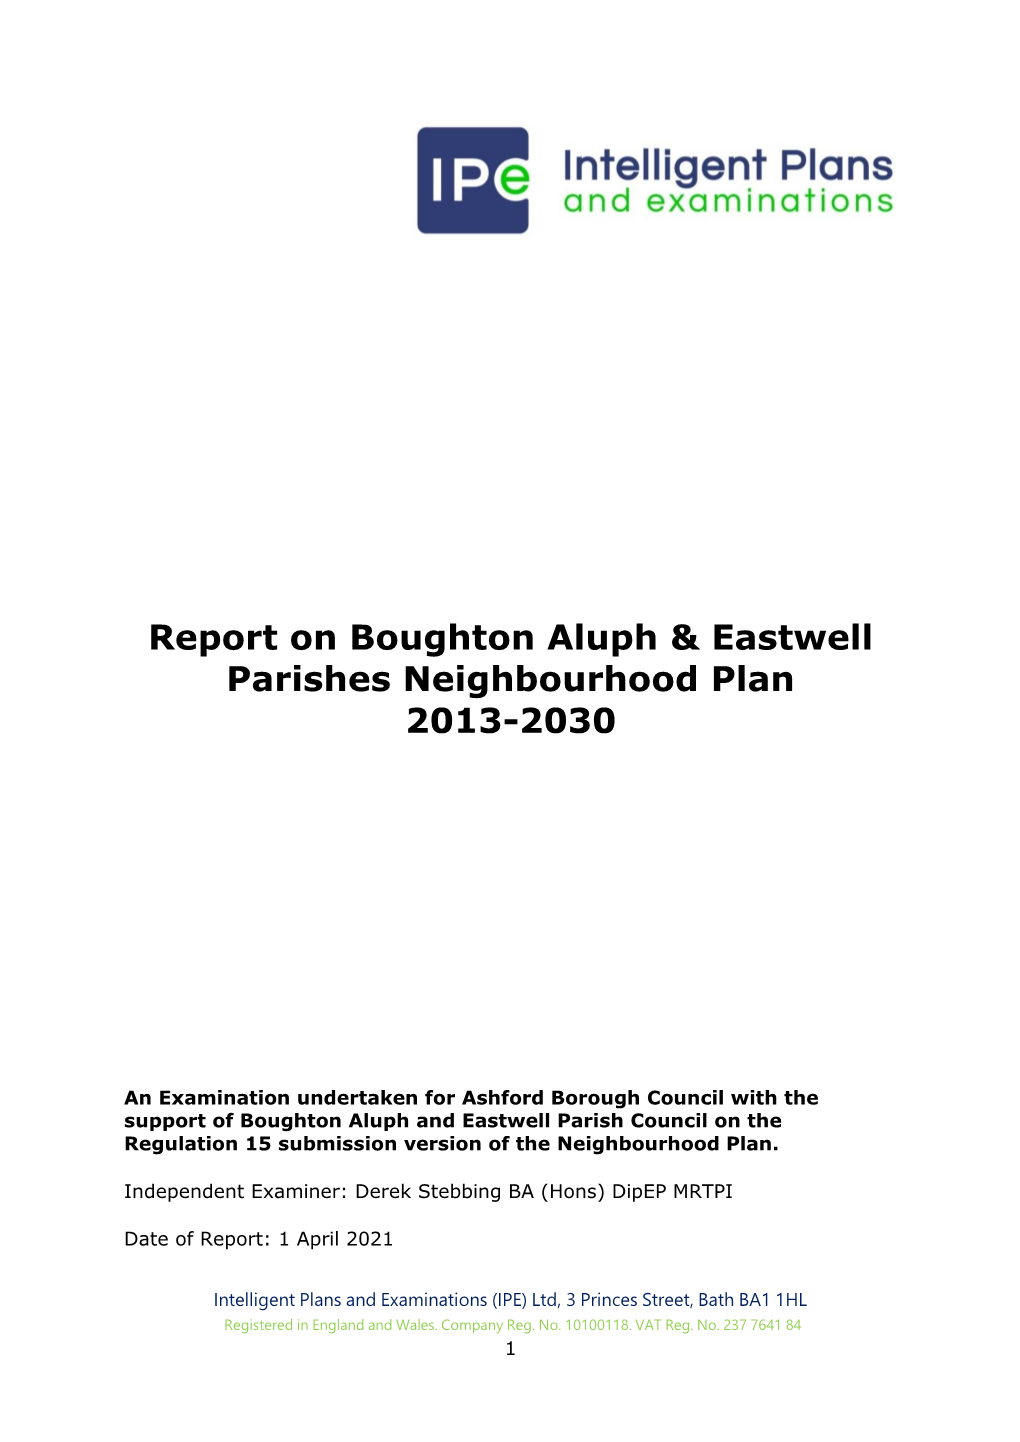 Boughton Aluph and Eastwell Parishes Neighbourhood Plan 2013-2030 Meets the Basic Conditions for Neighbourhood Plans